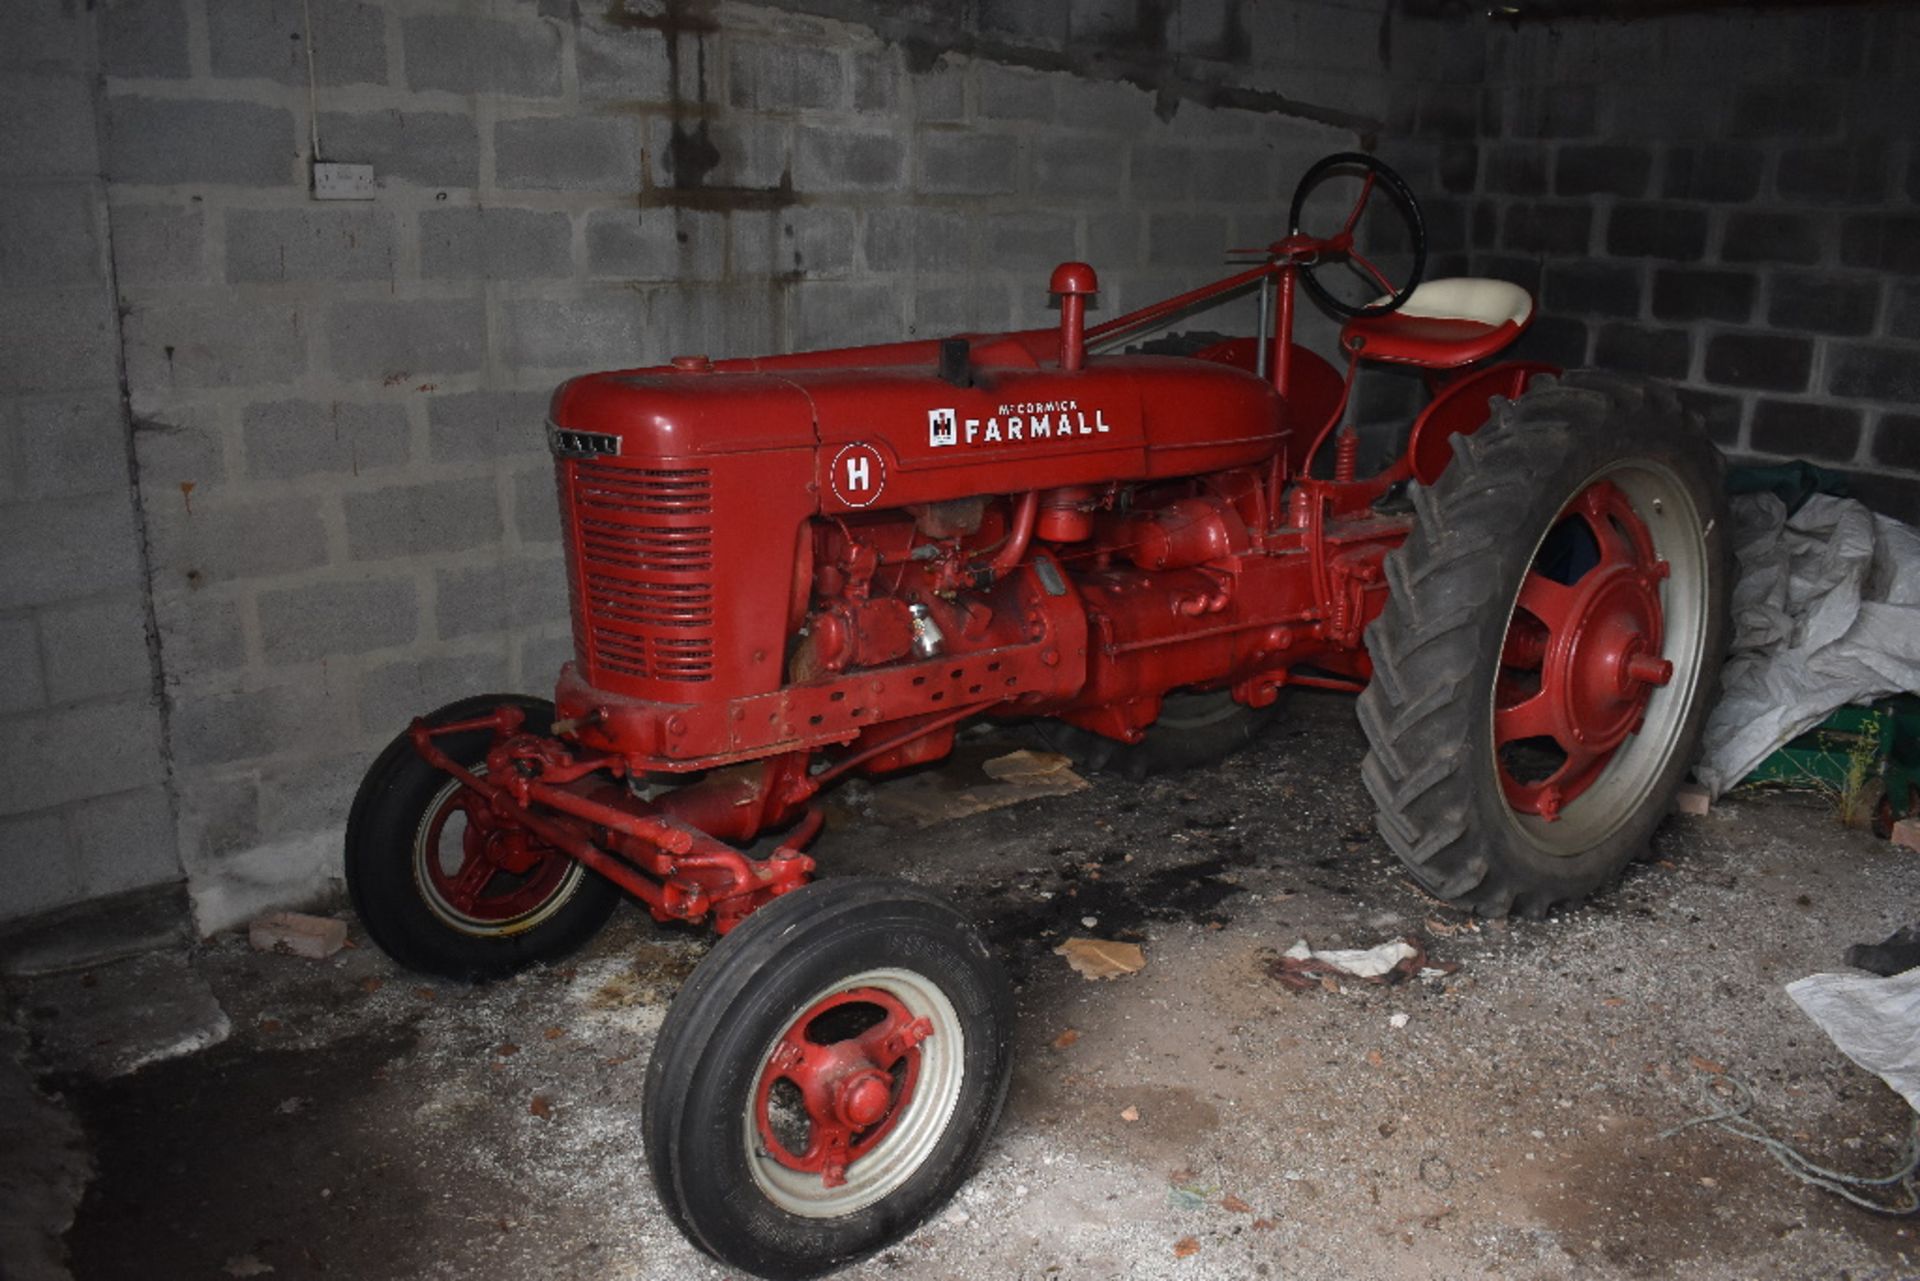 A 1950 McCormick International Harvester Farmall Model H tractor, unregistered, chassis number FBH-